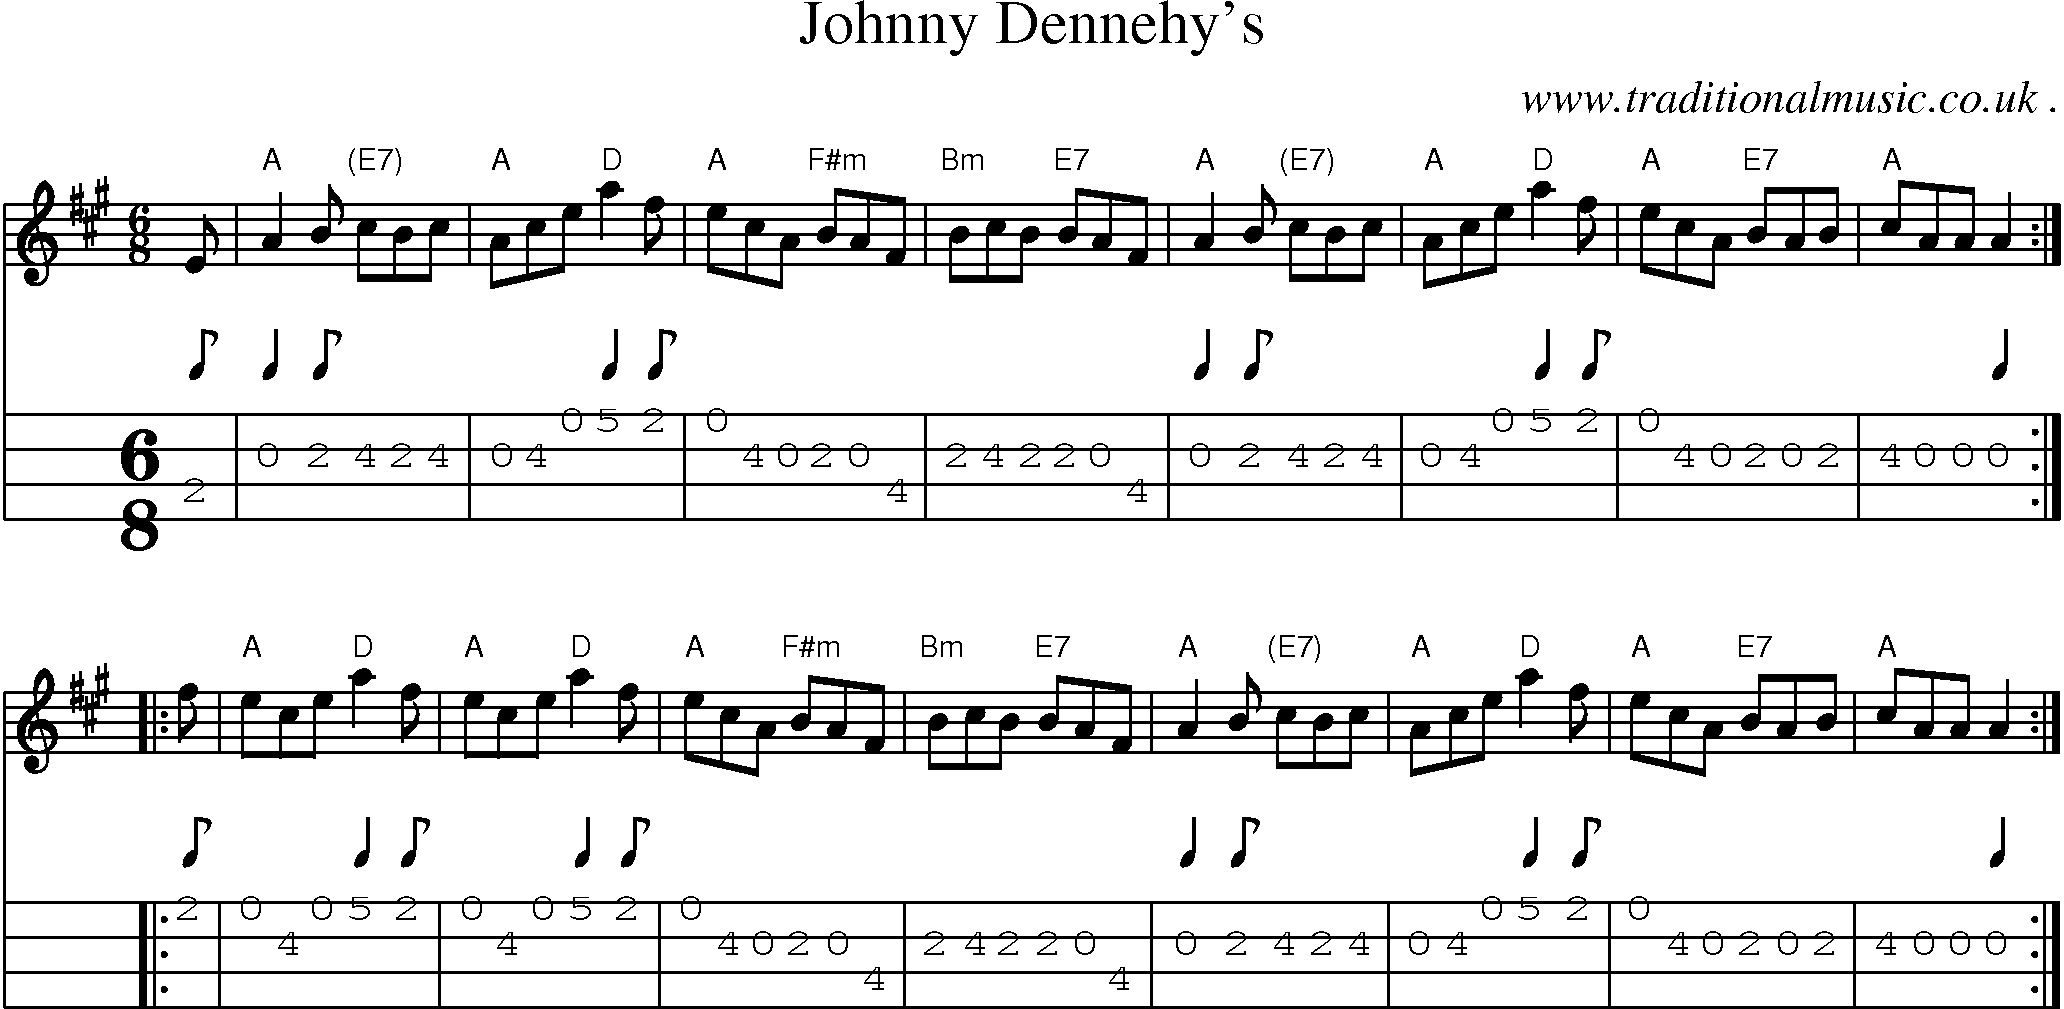 Sheet-music  score, Chords and Mandolin Tabs for Johnny Dennehys